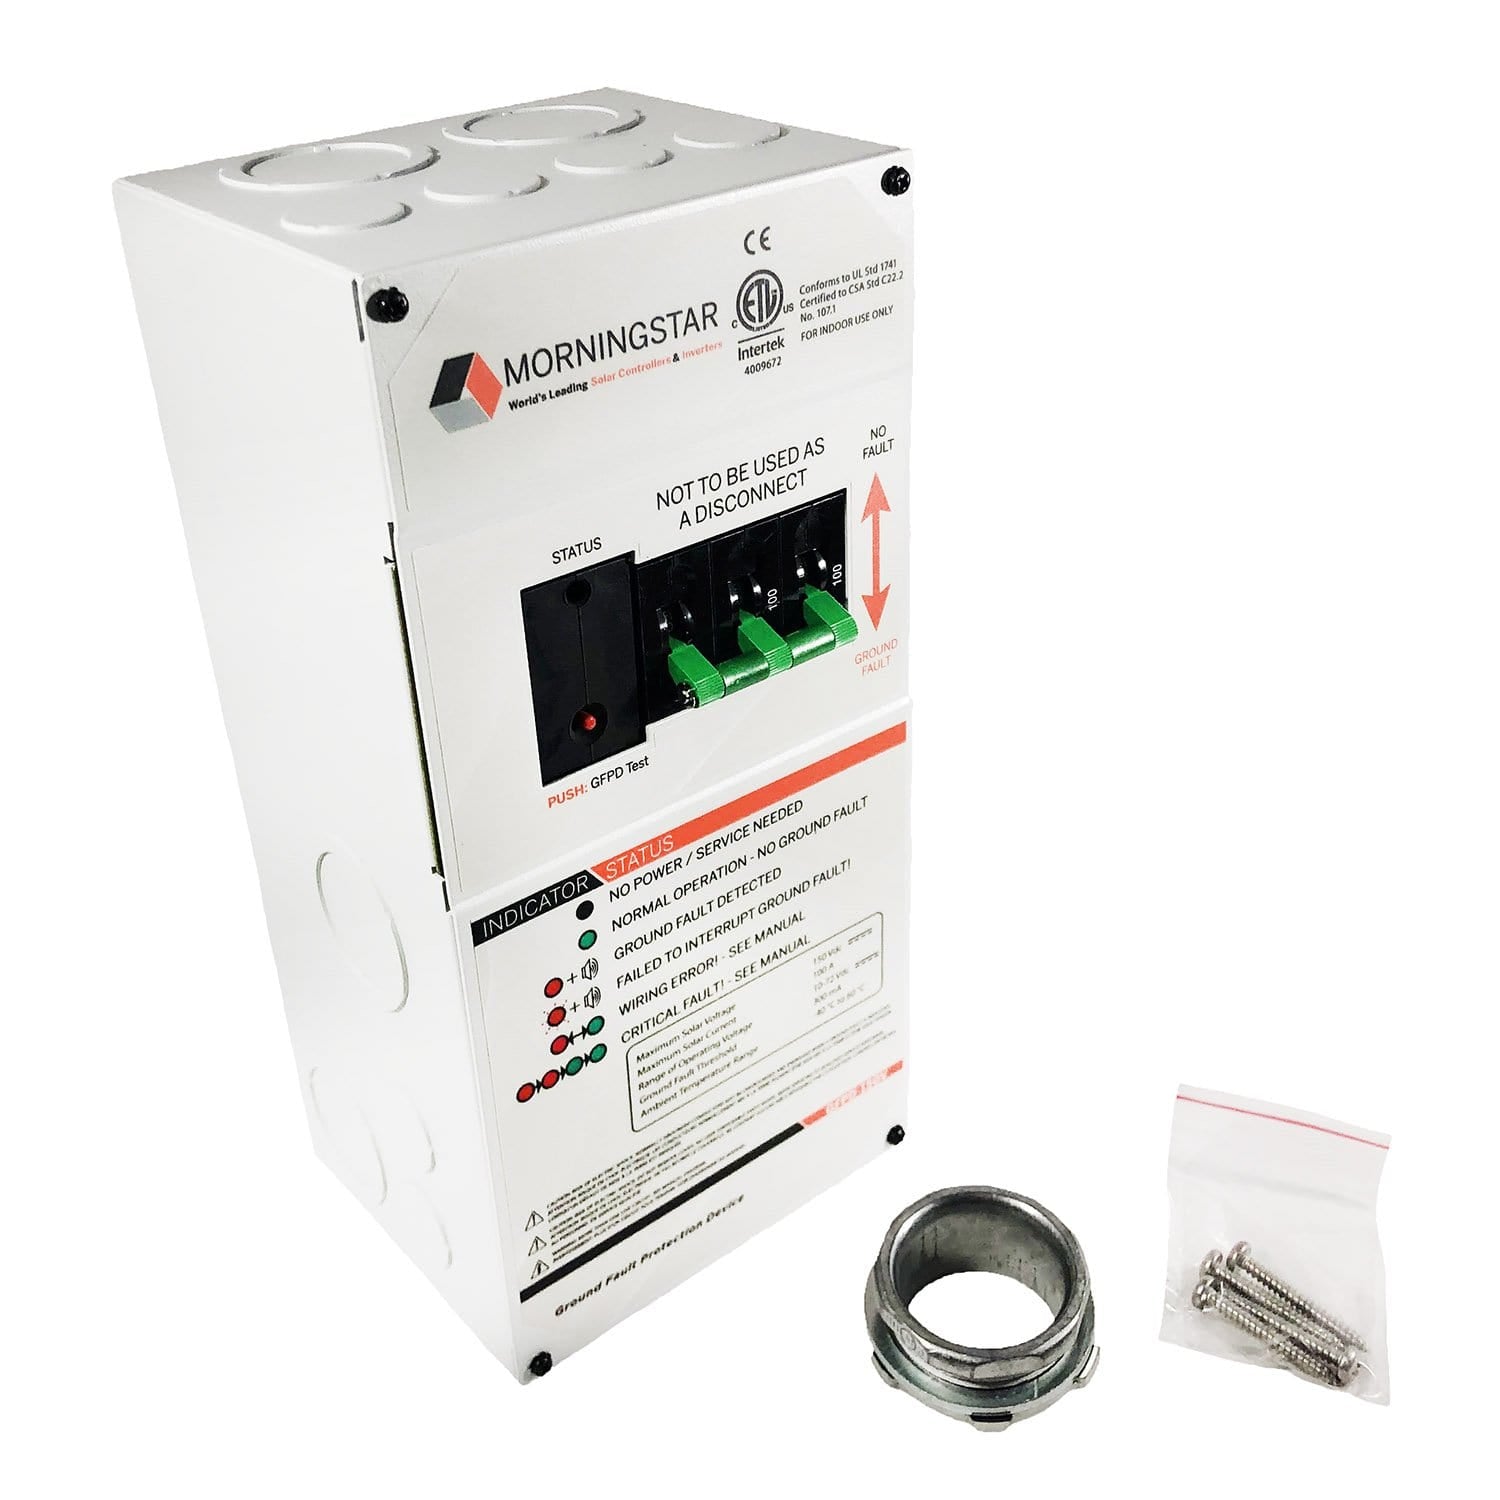 Morningstar GFPD-150V Ground Fault Protection Device